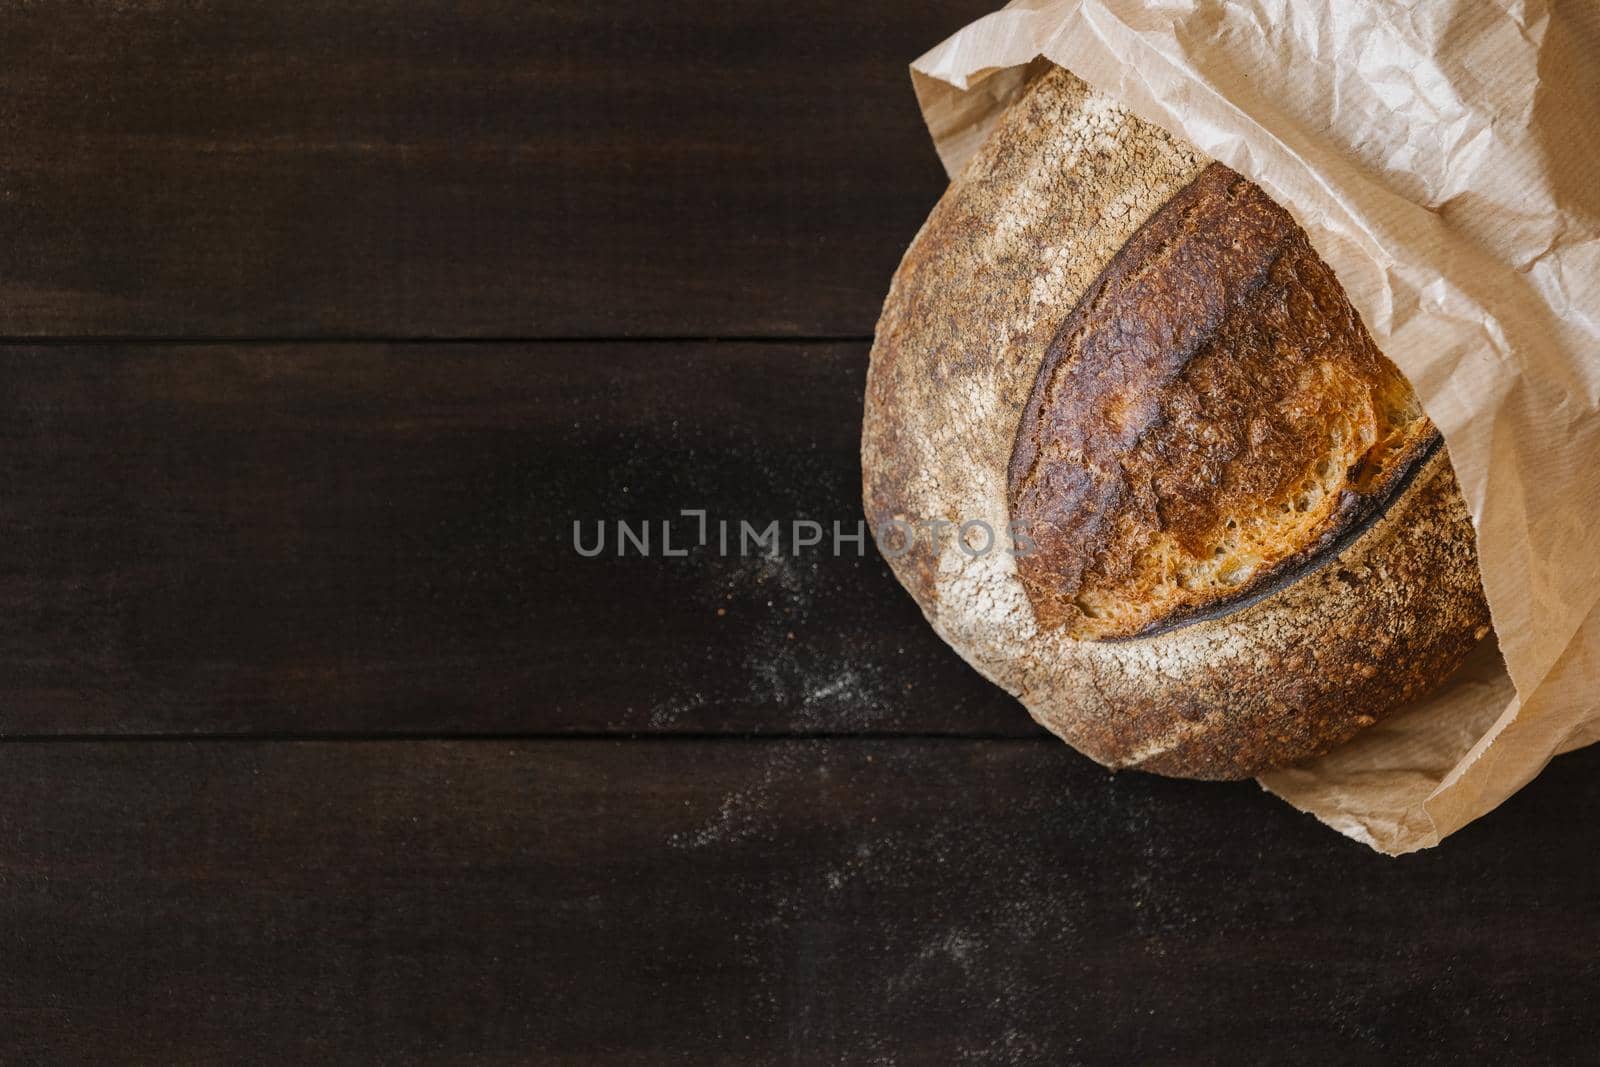 Homemade wheat bread on dark wooden background with particles of flour. Top view of crispy baked bread surface texture.